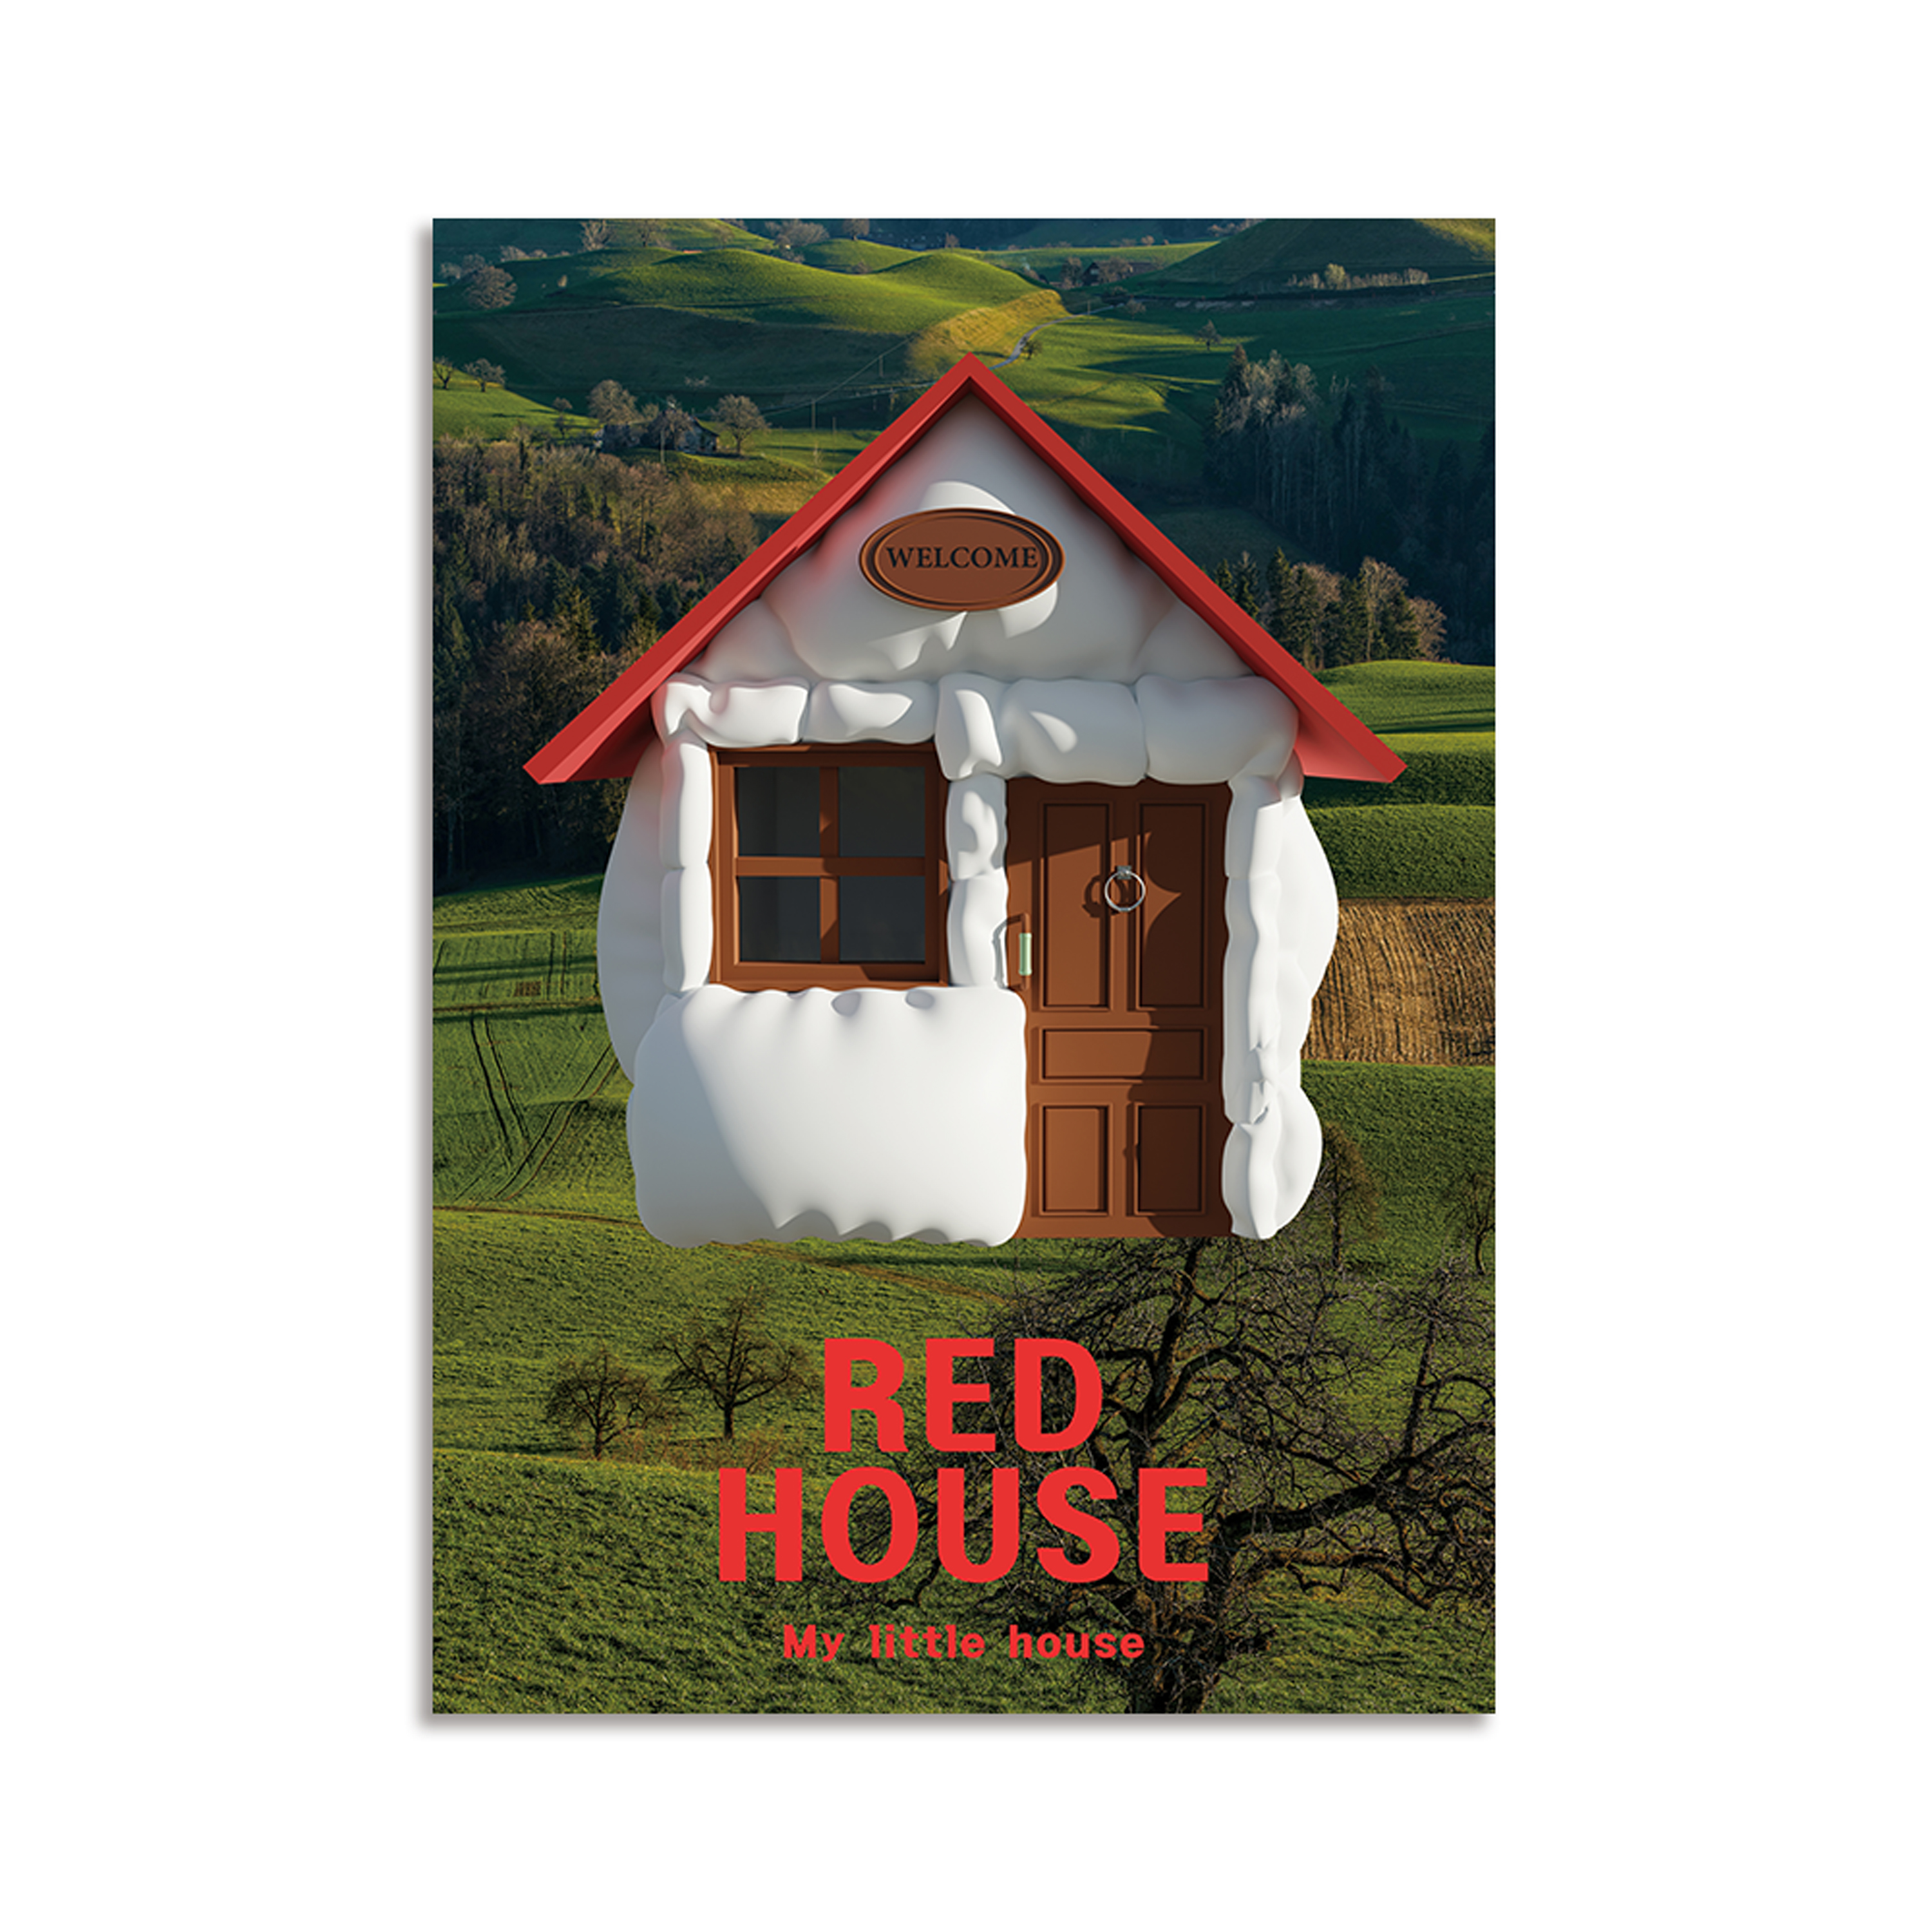 RED HOUSE #morning